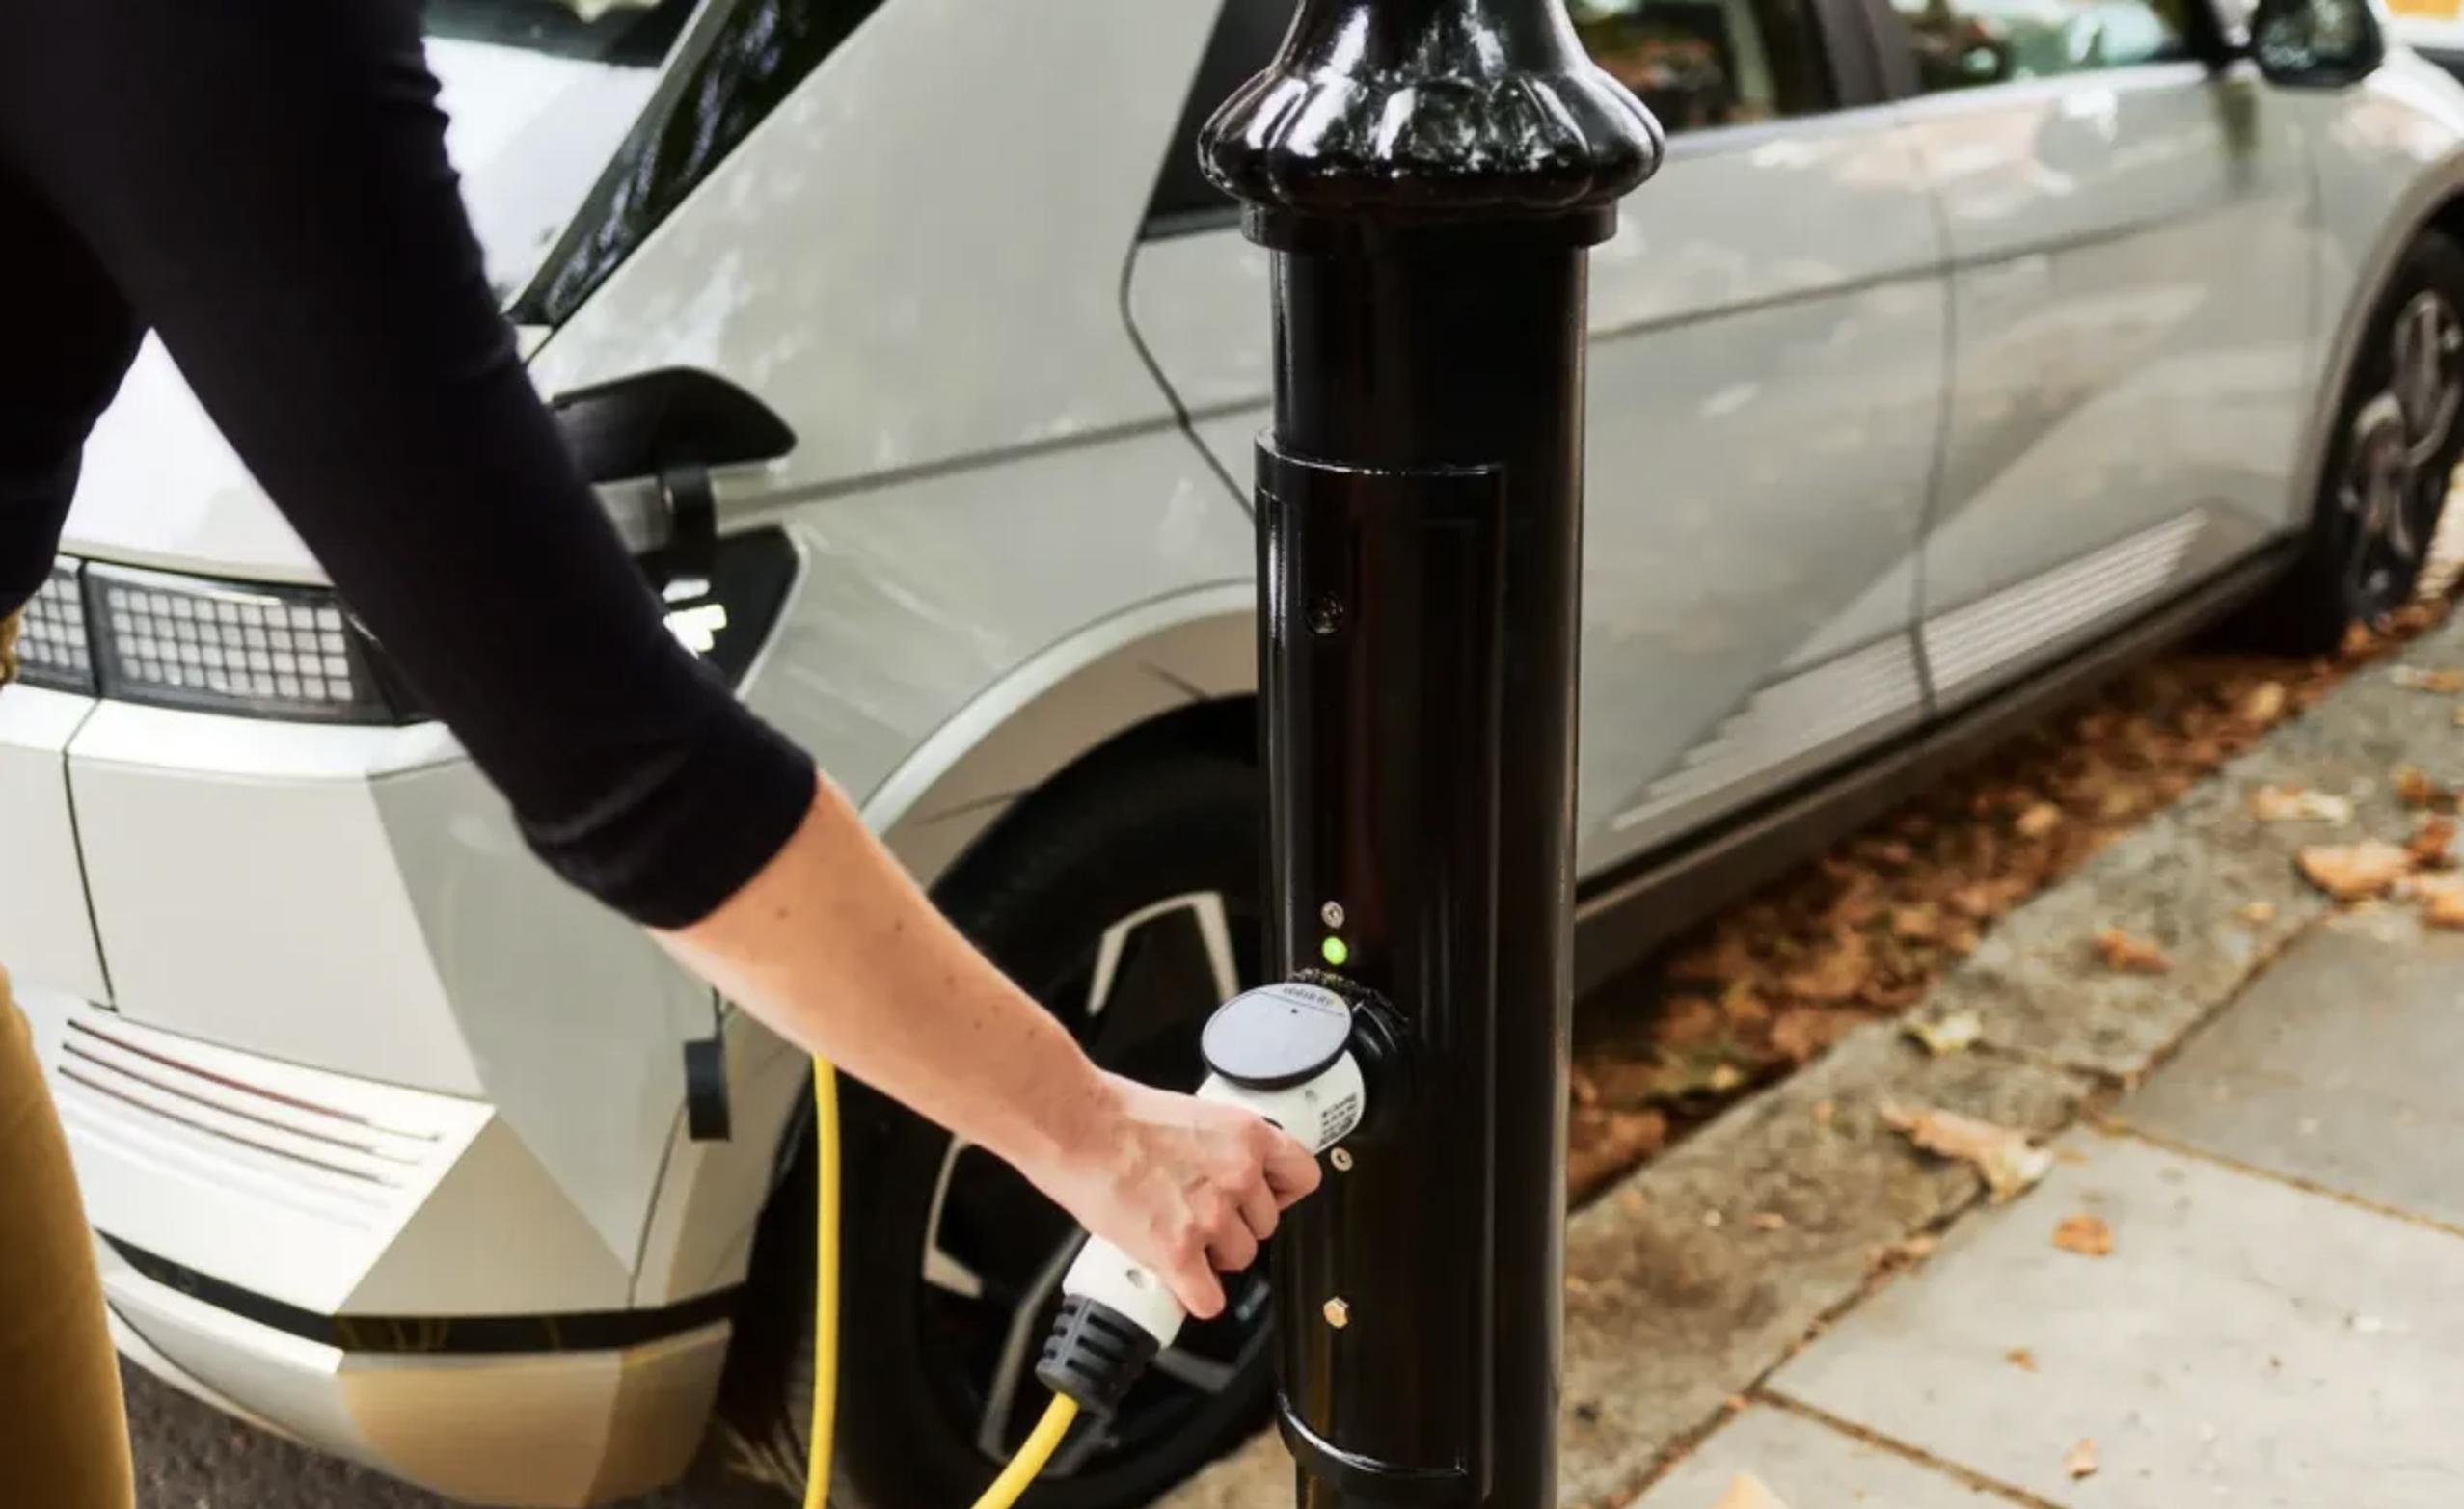 Ubitricity chargepoints will be deployed on residential streets across Bexley